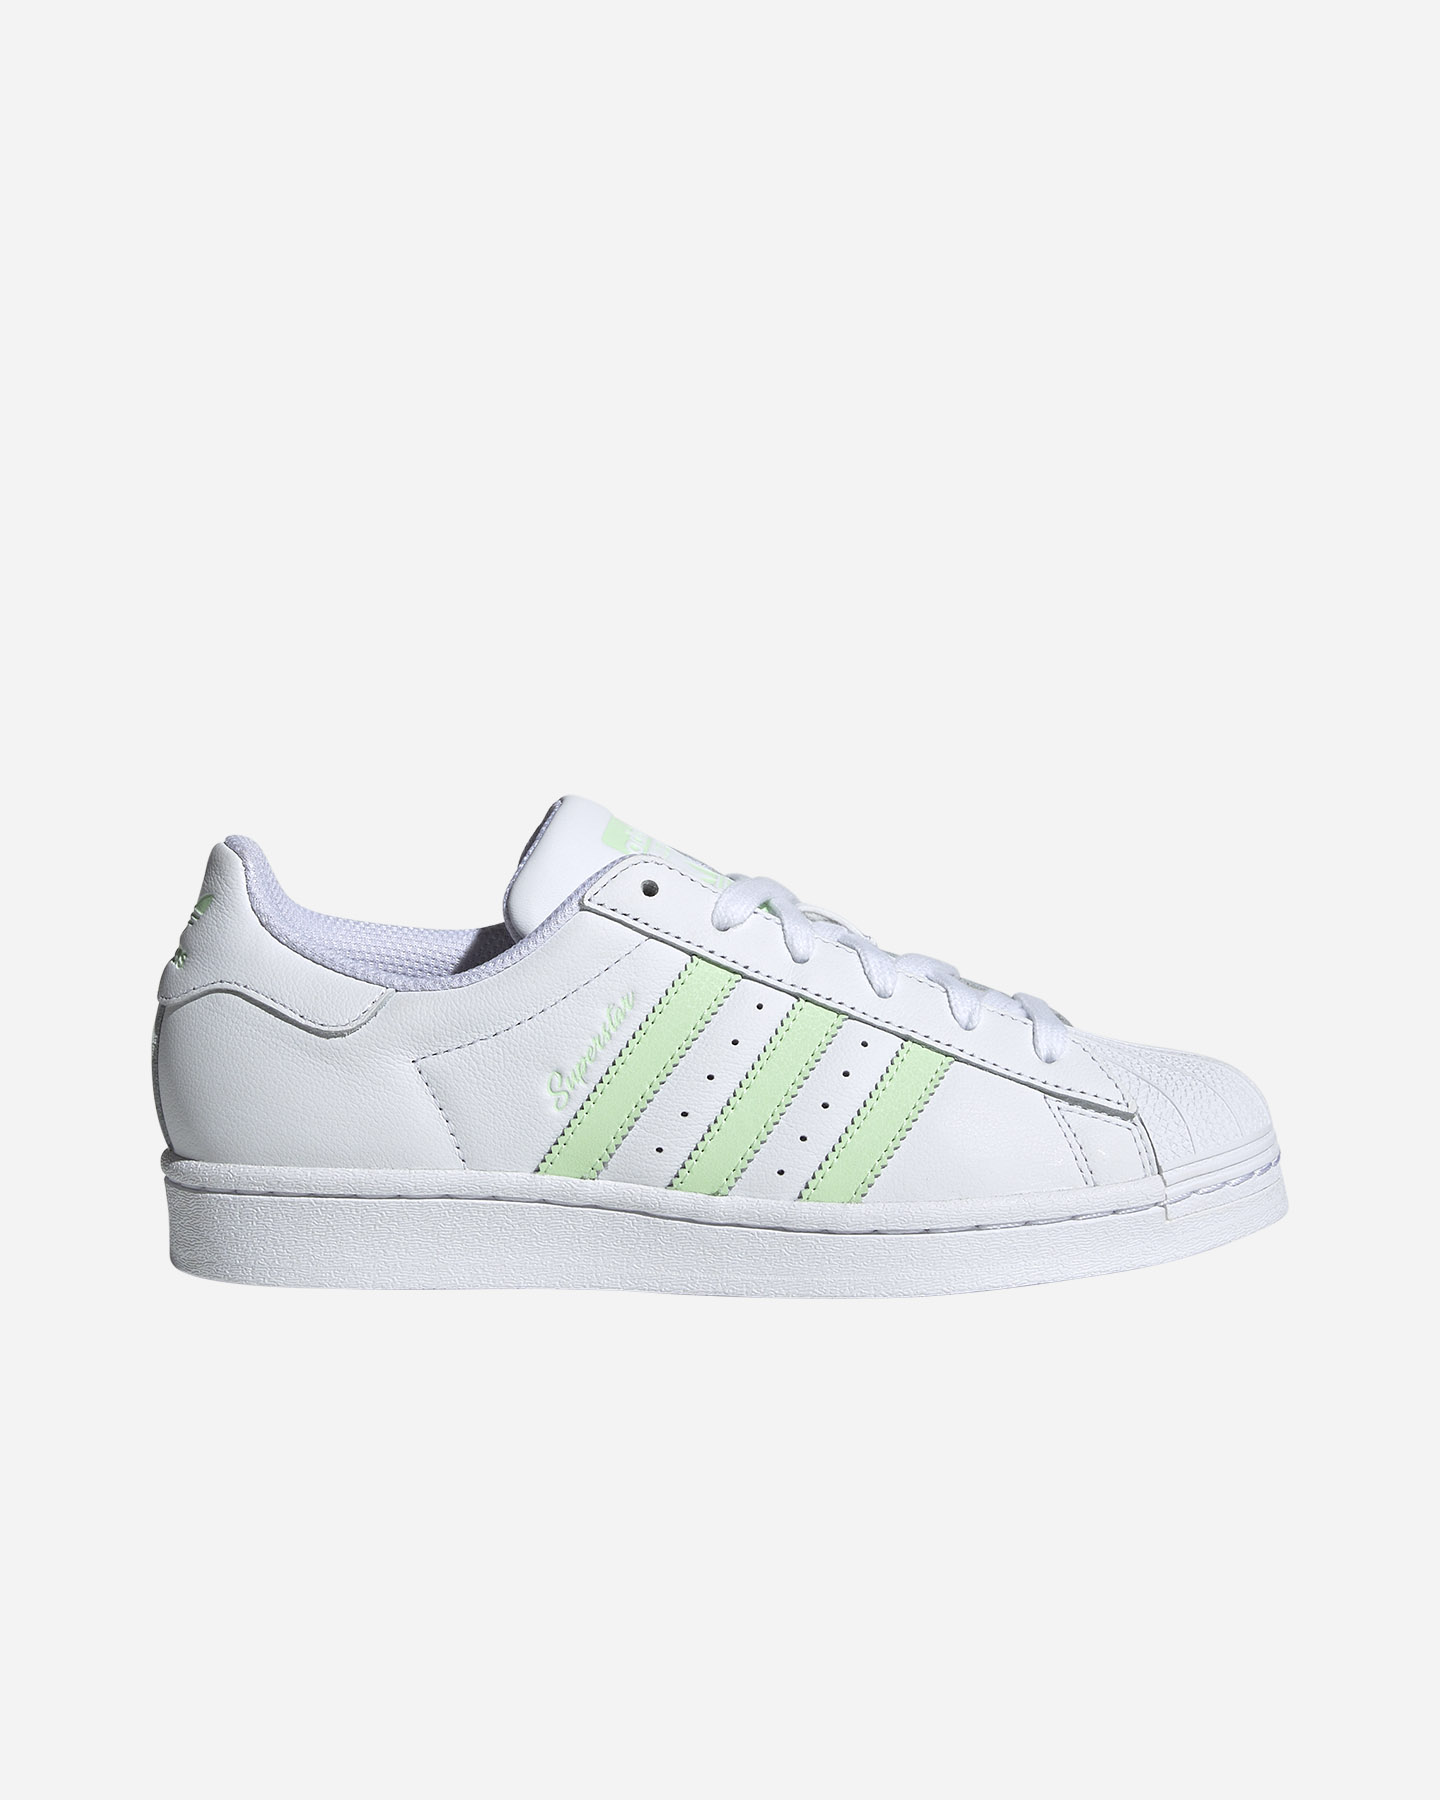 Image of Adidas Superstar W - Scarpe Sneakers - Donna